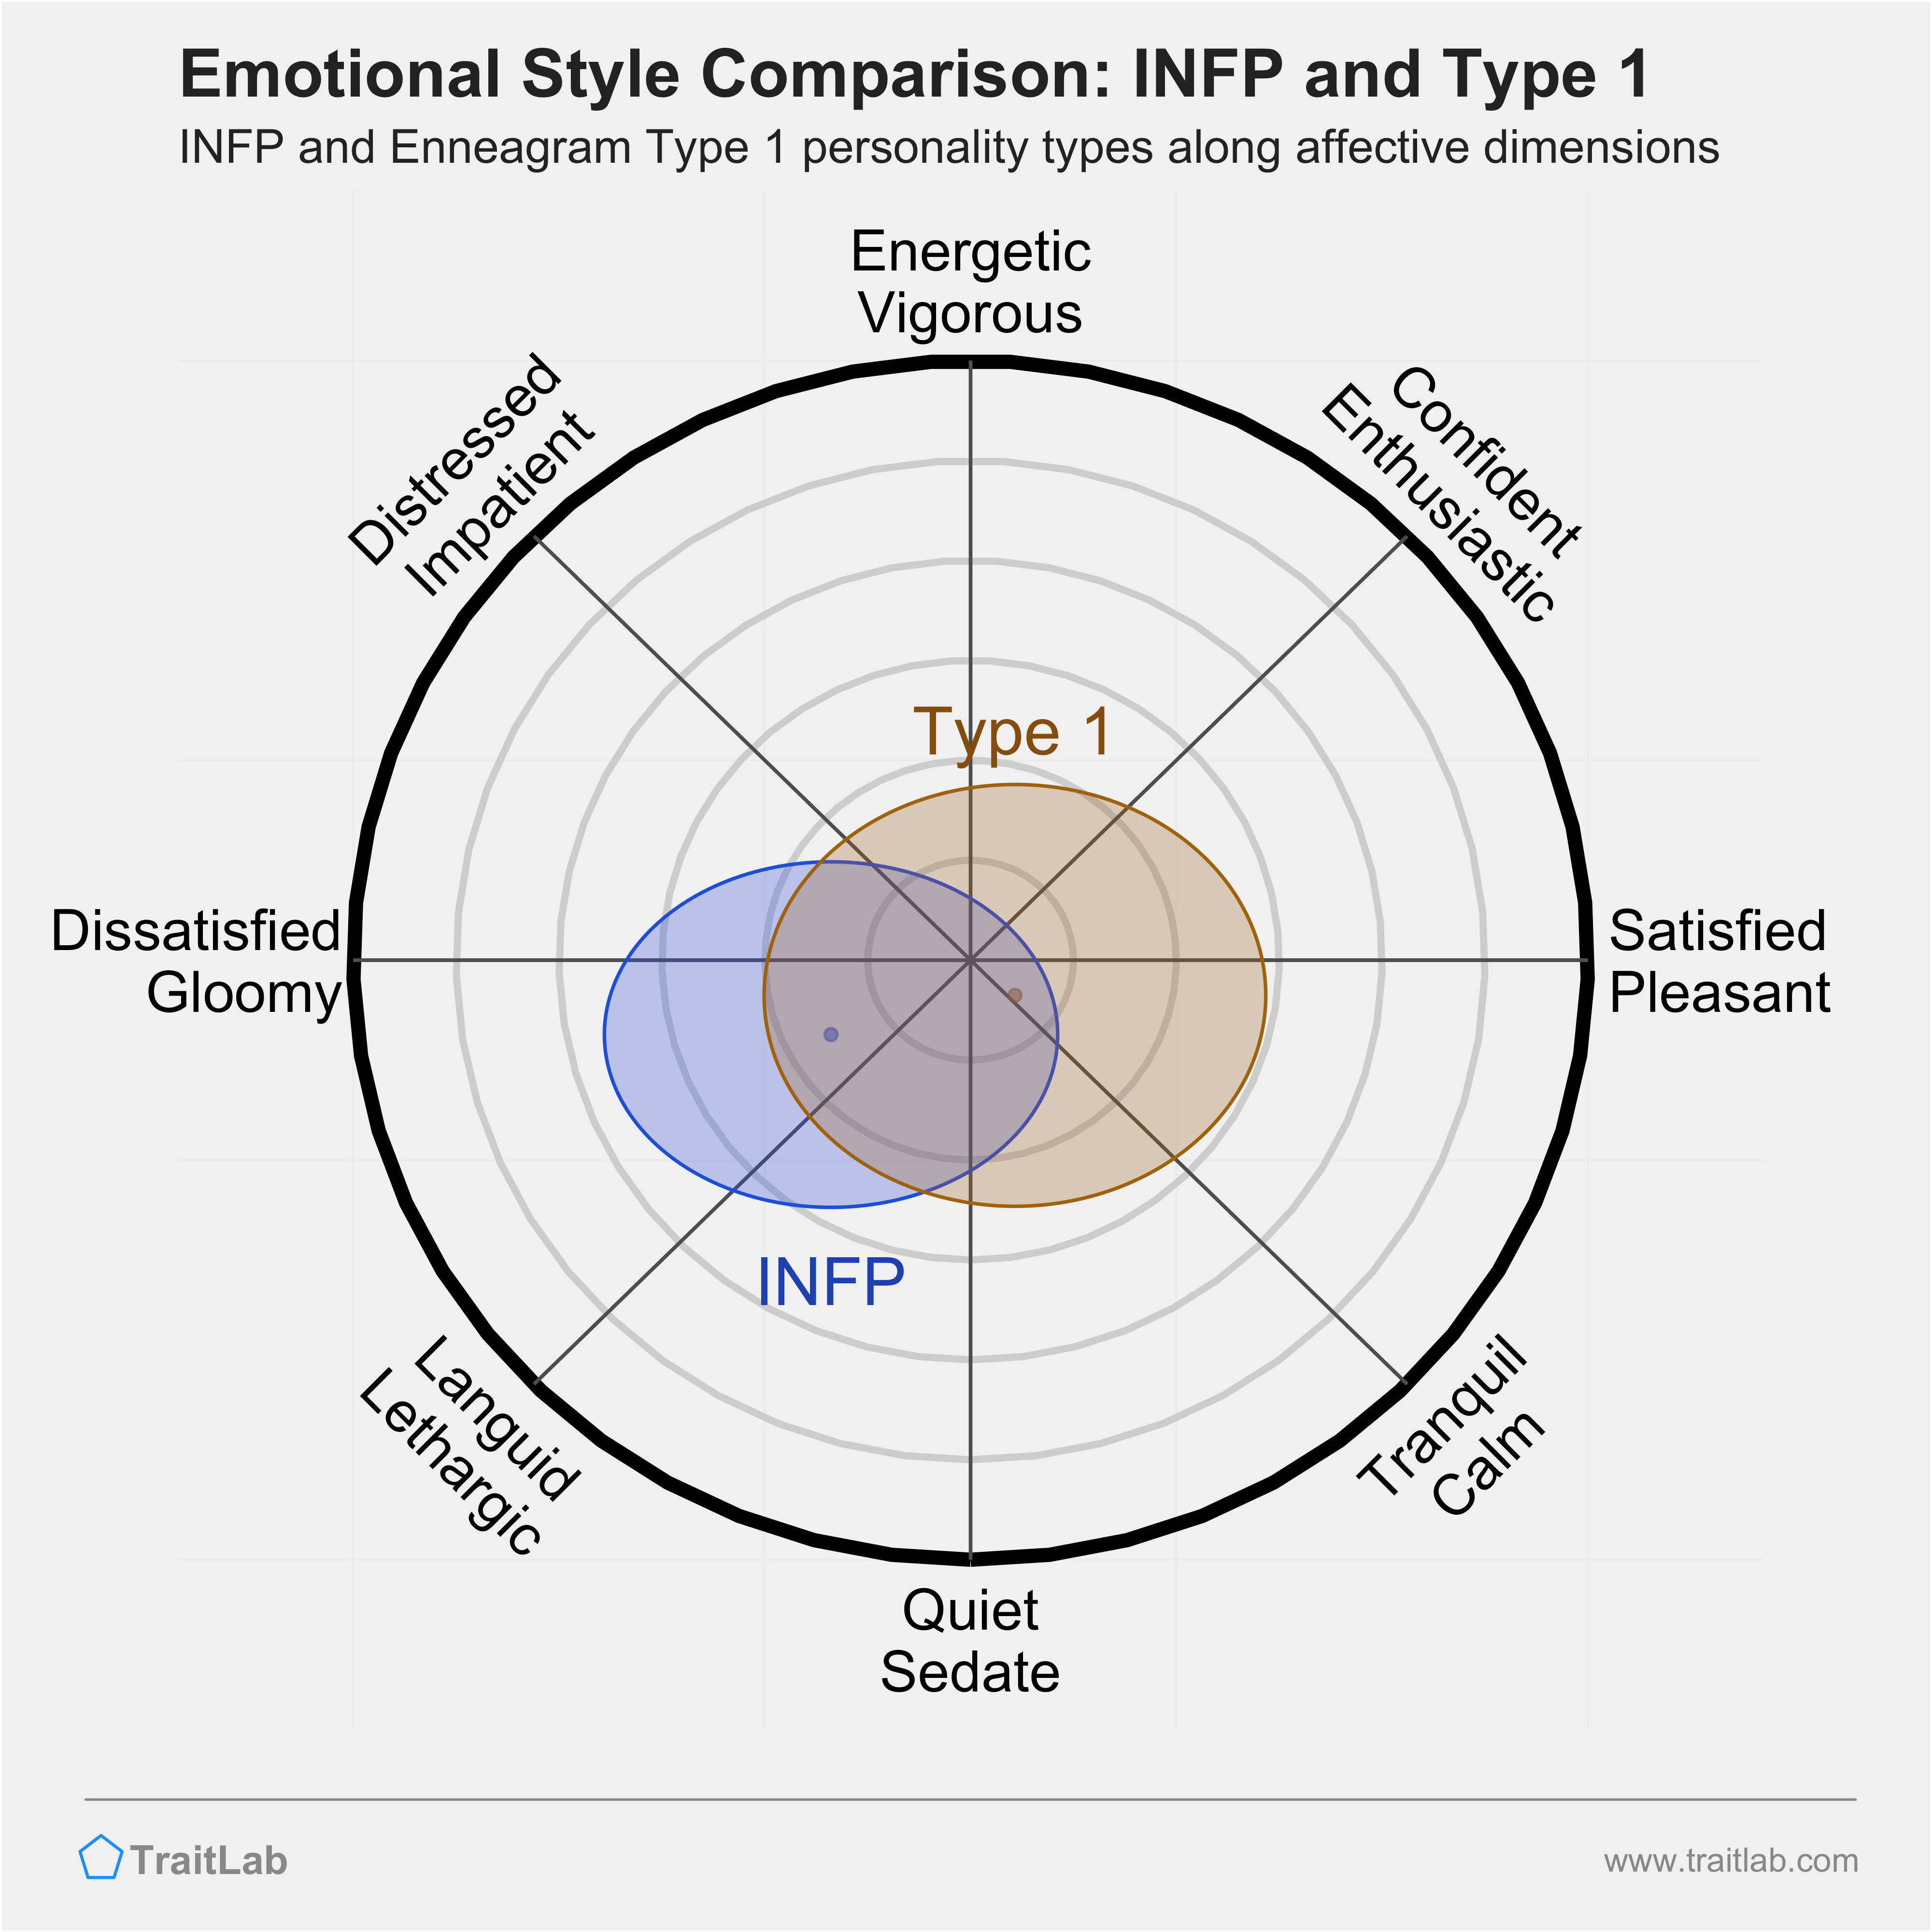 INFP and Type 1 comparison across emotional (affective) dimensions